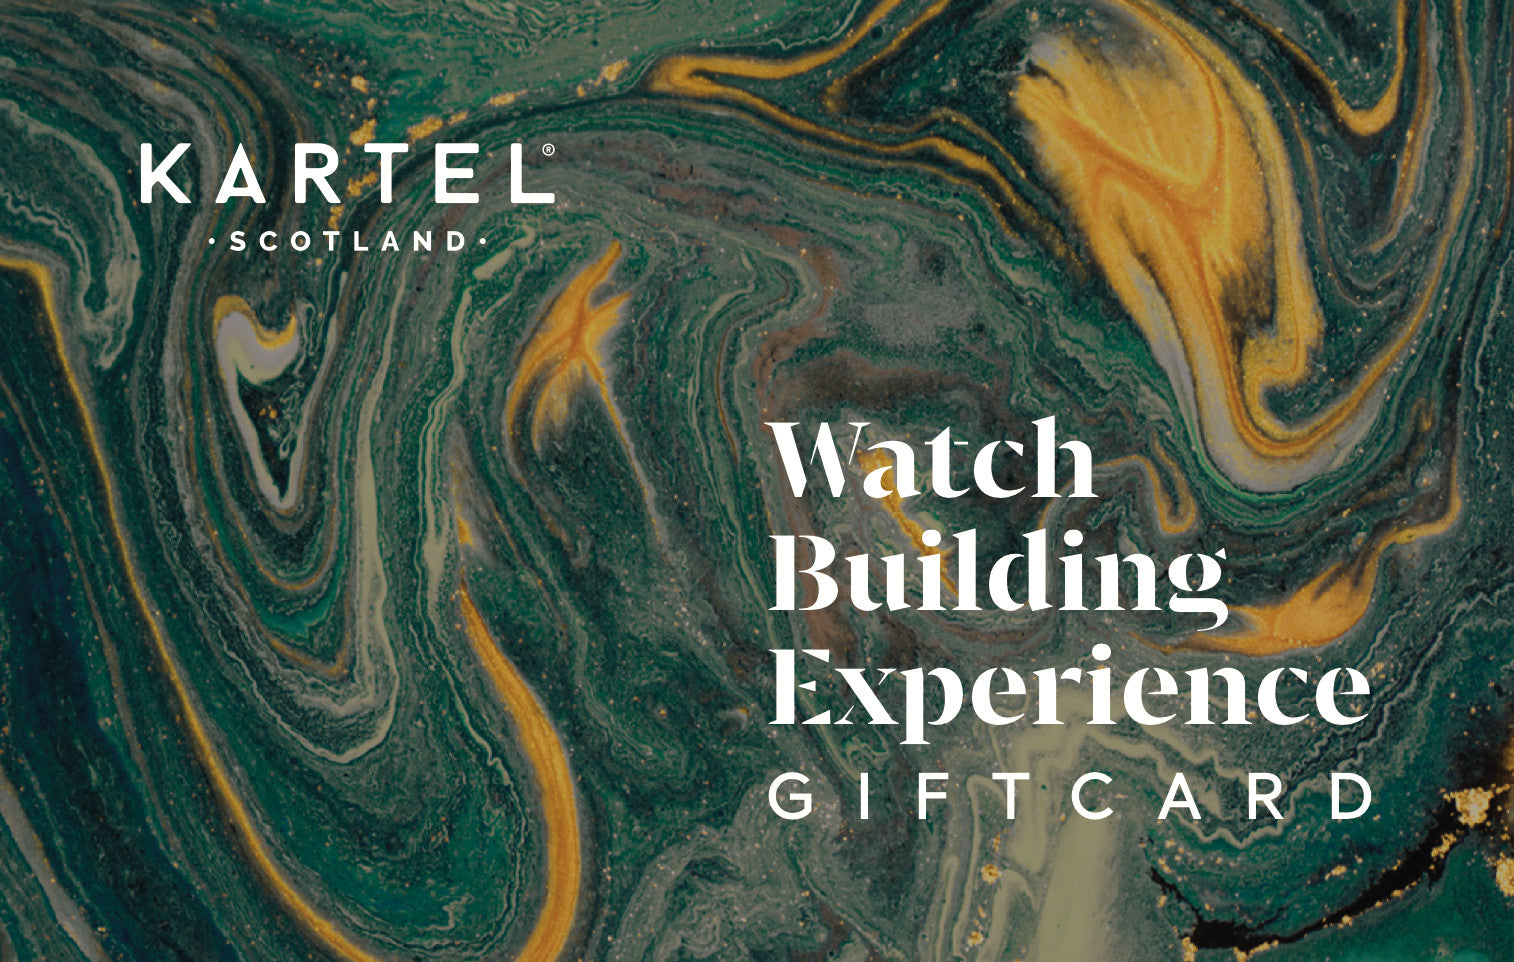 Watch Building Experience Gift Card